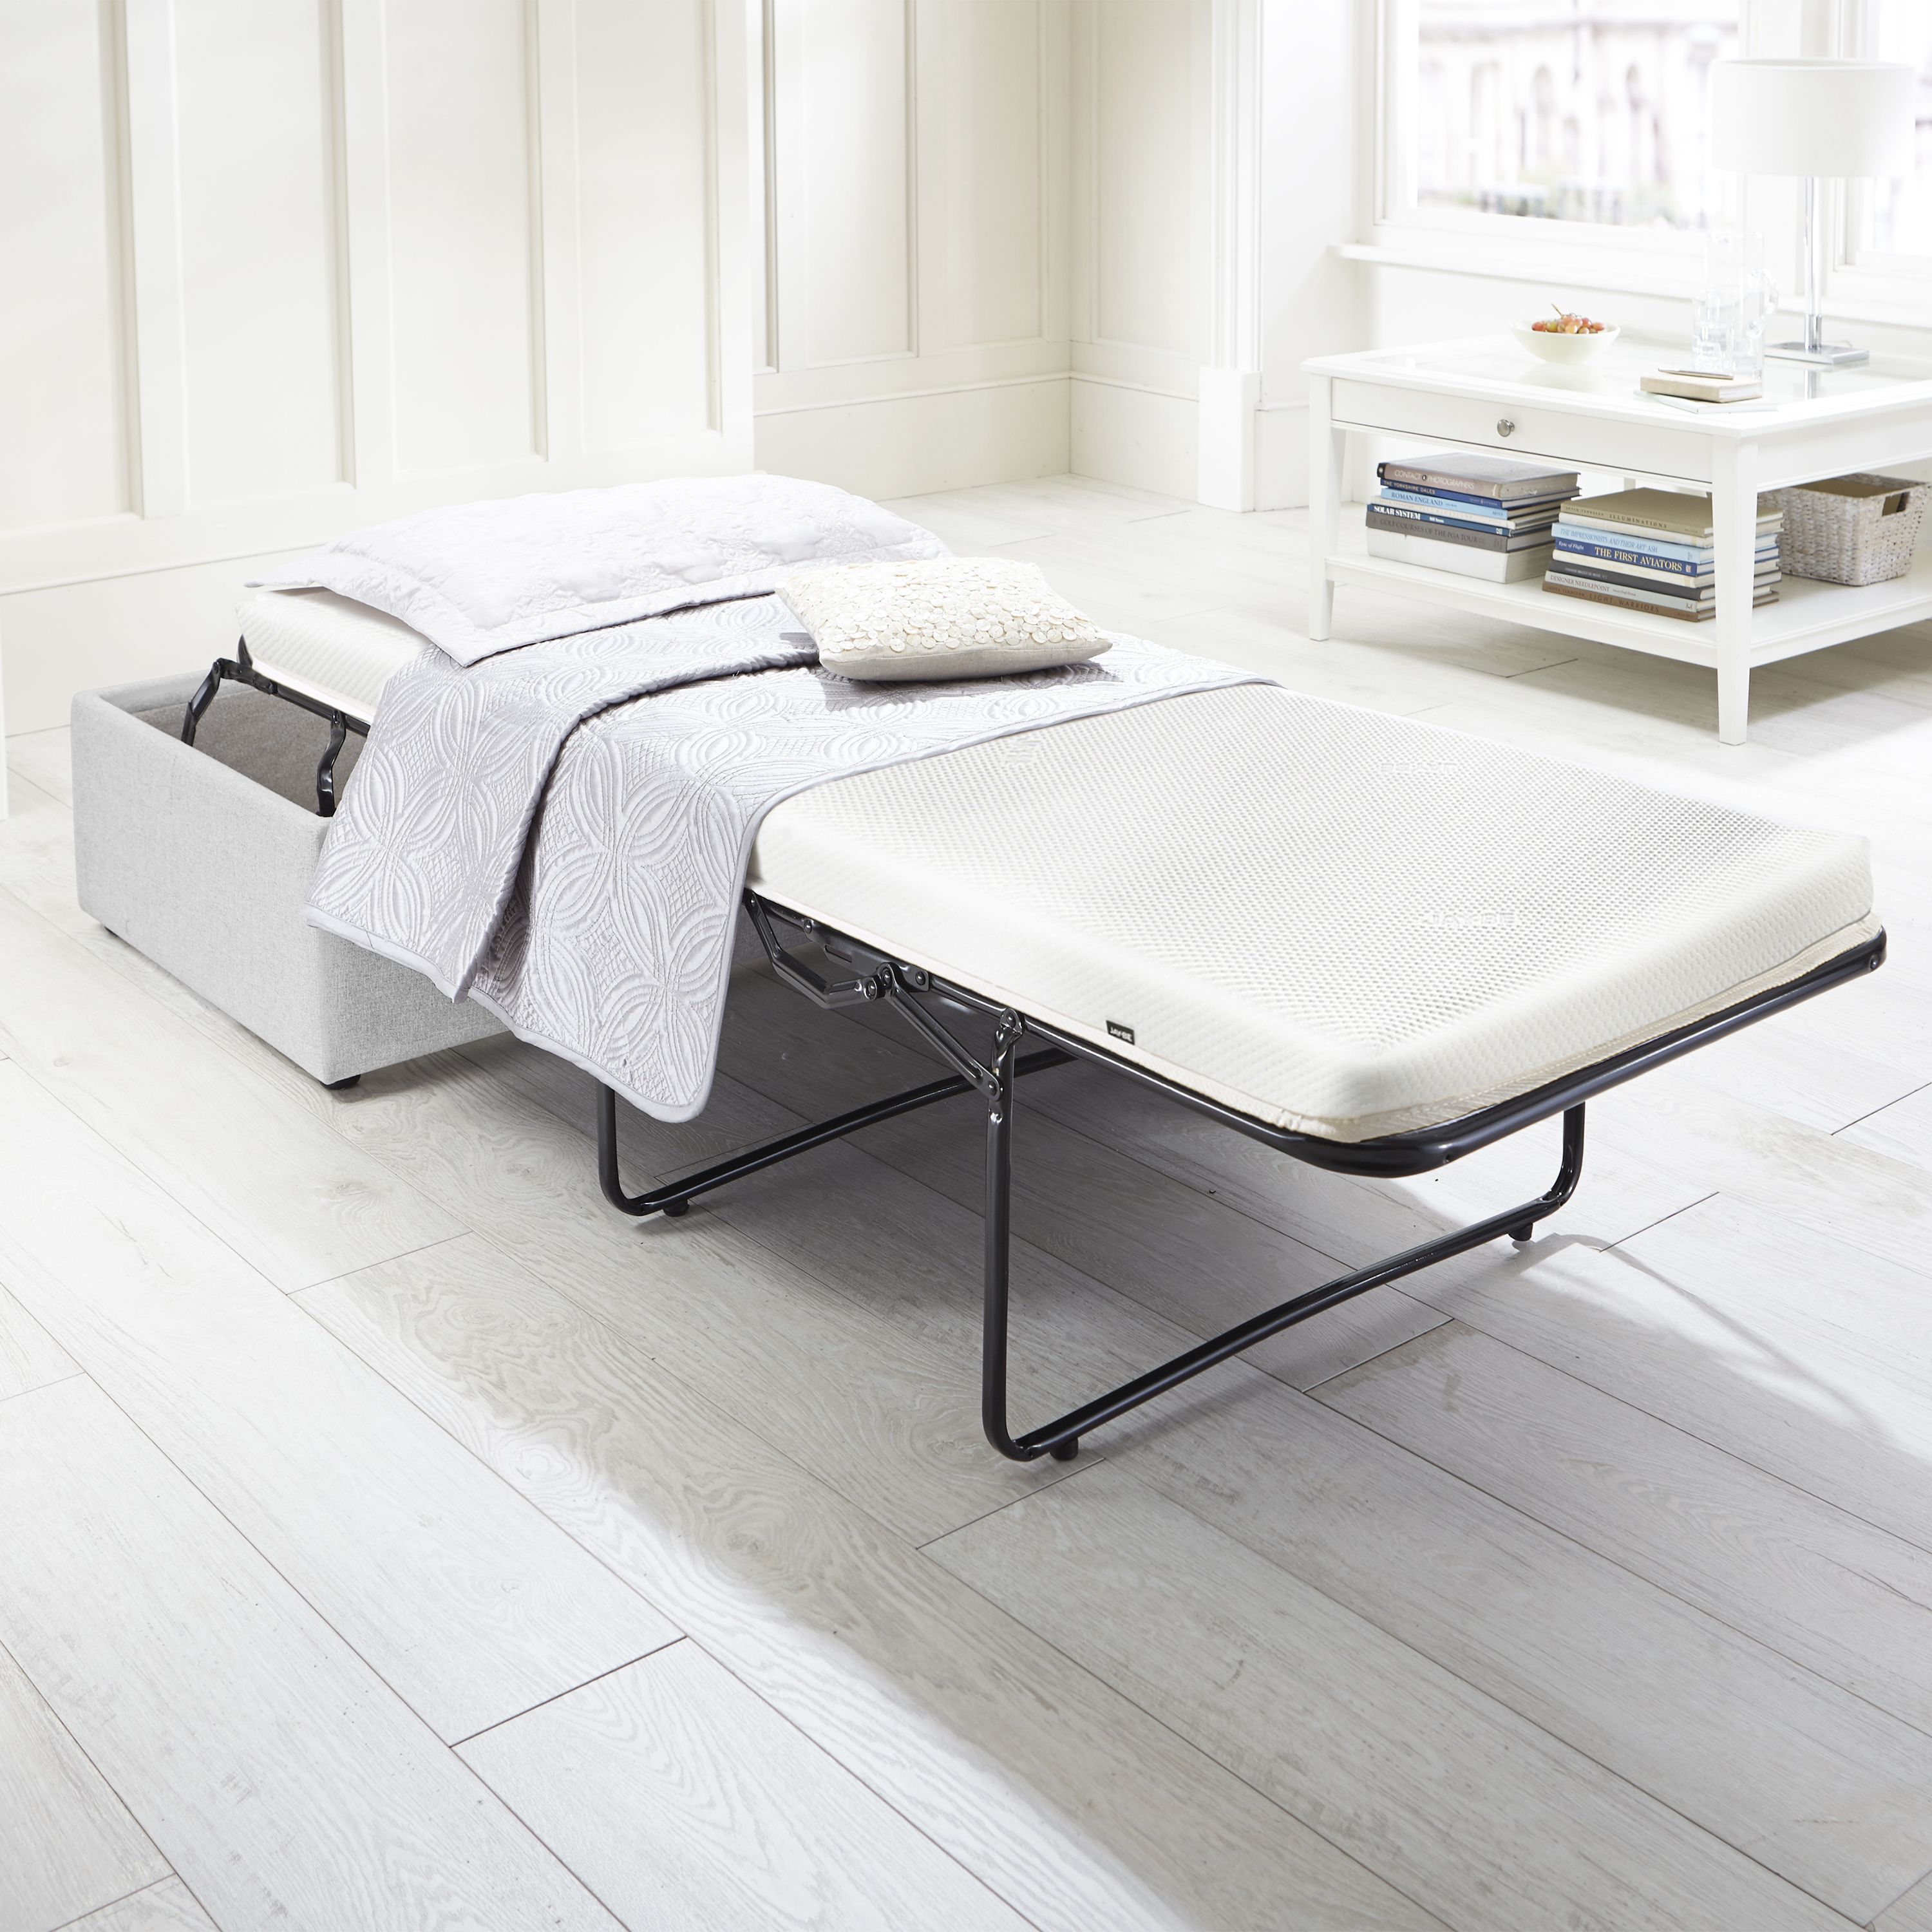 Jay-Be Dove Footstool bed